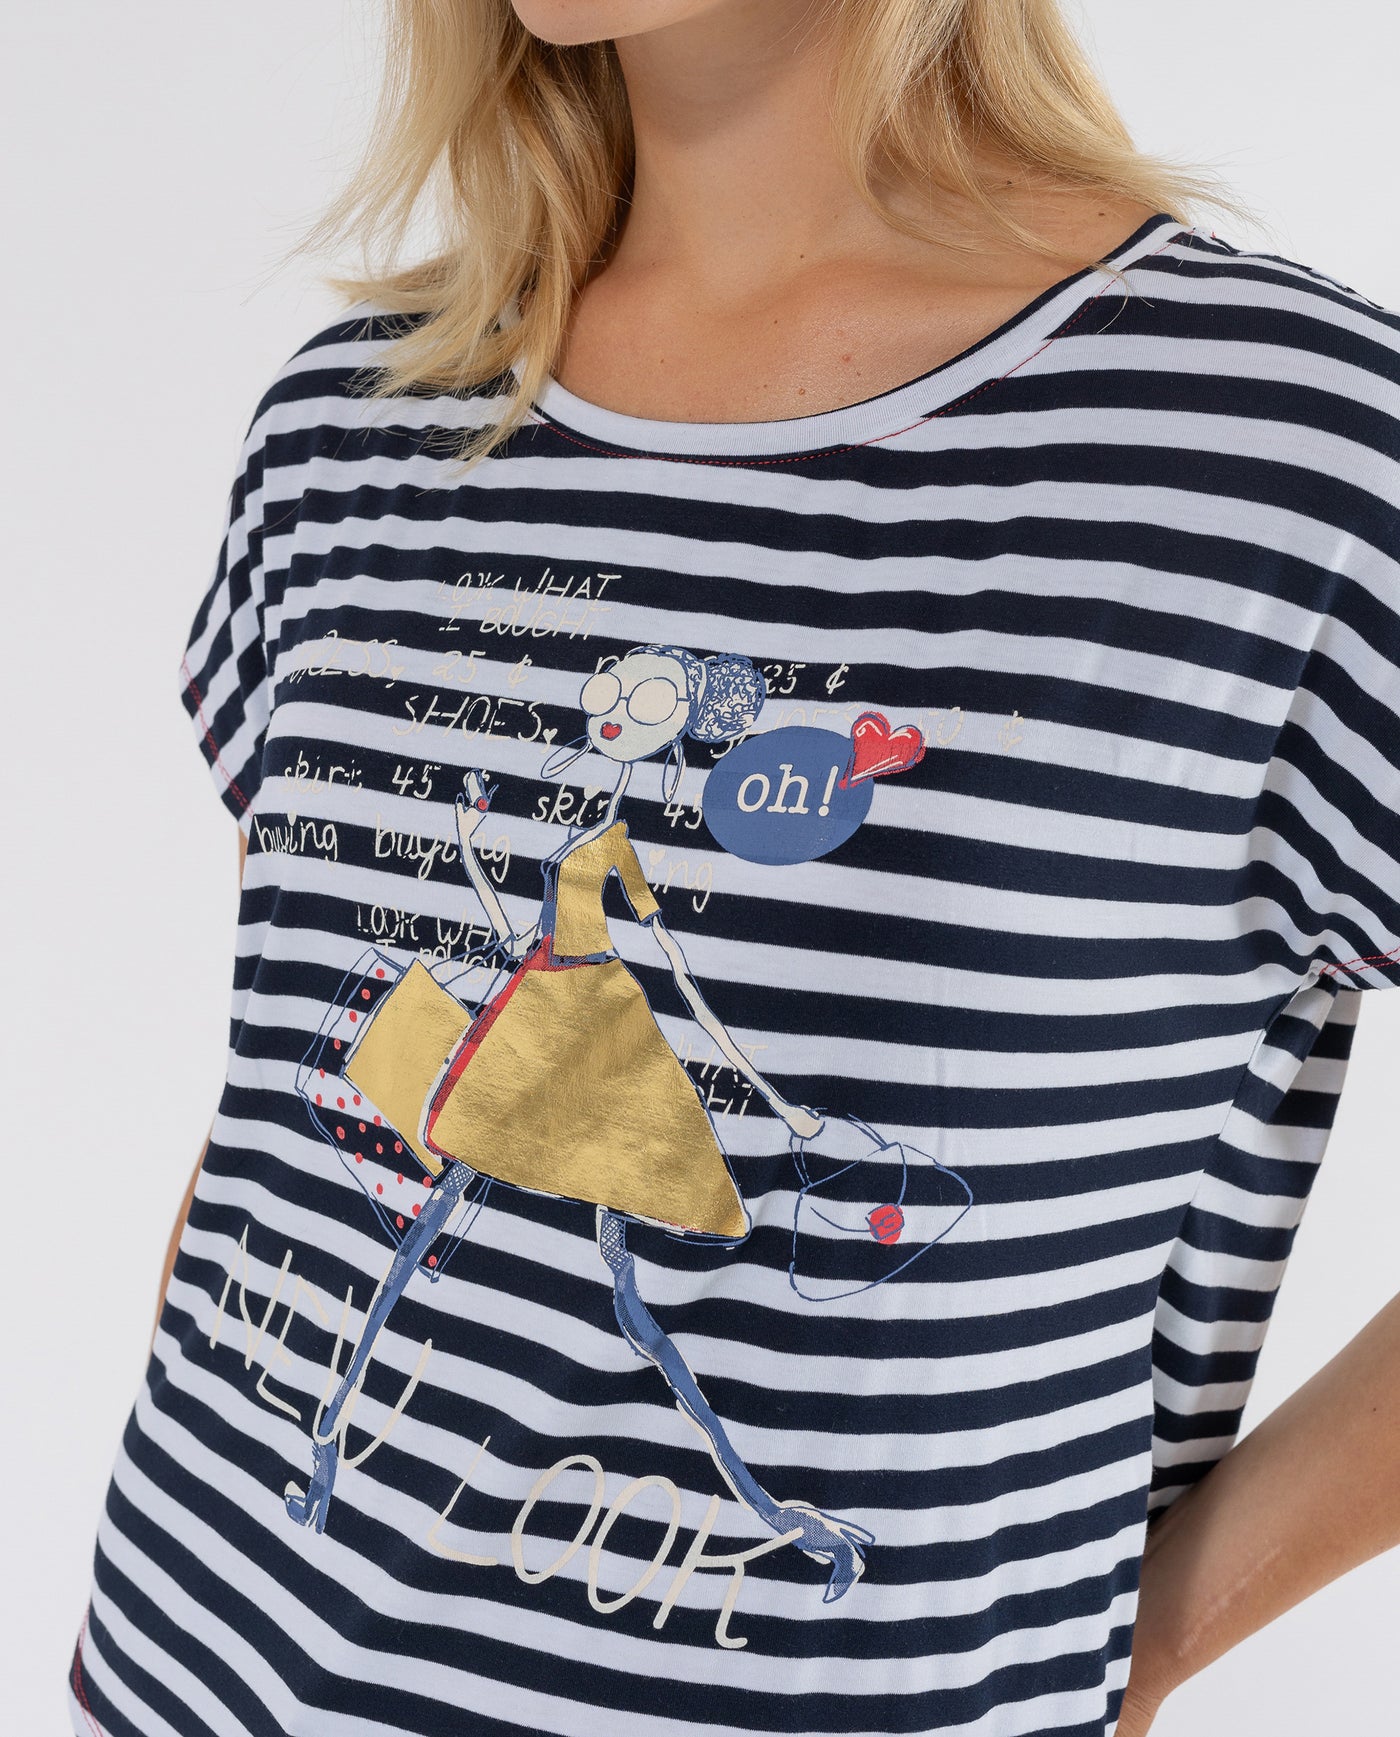 T-SHIRT A RIGHE CON STAMPA POSIZIONALE BLU NAVY